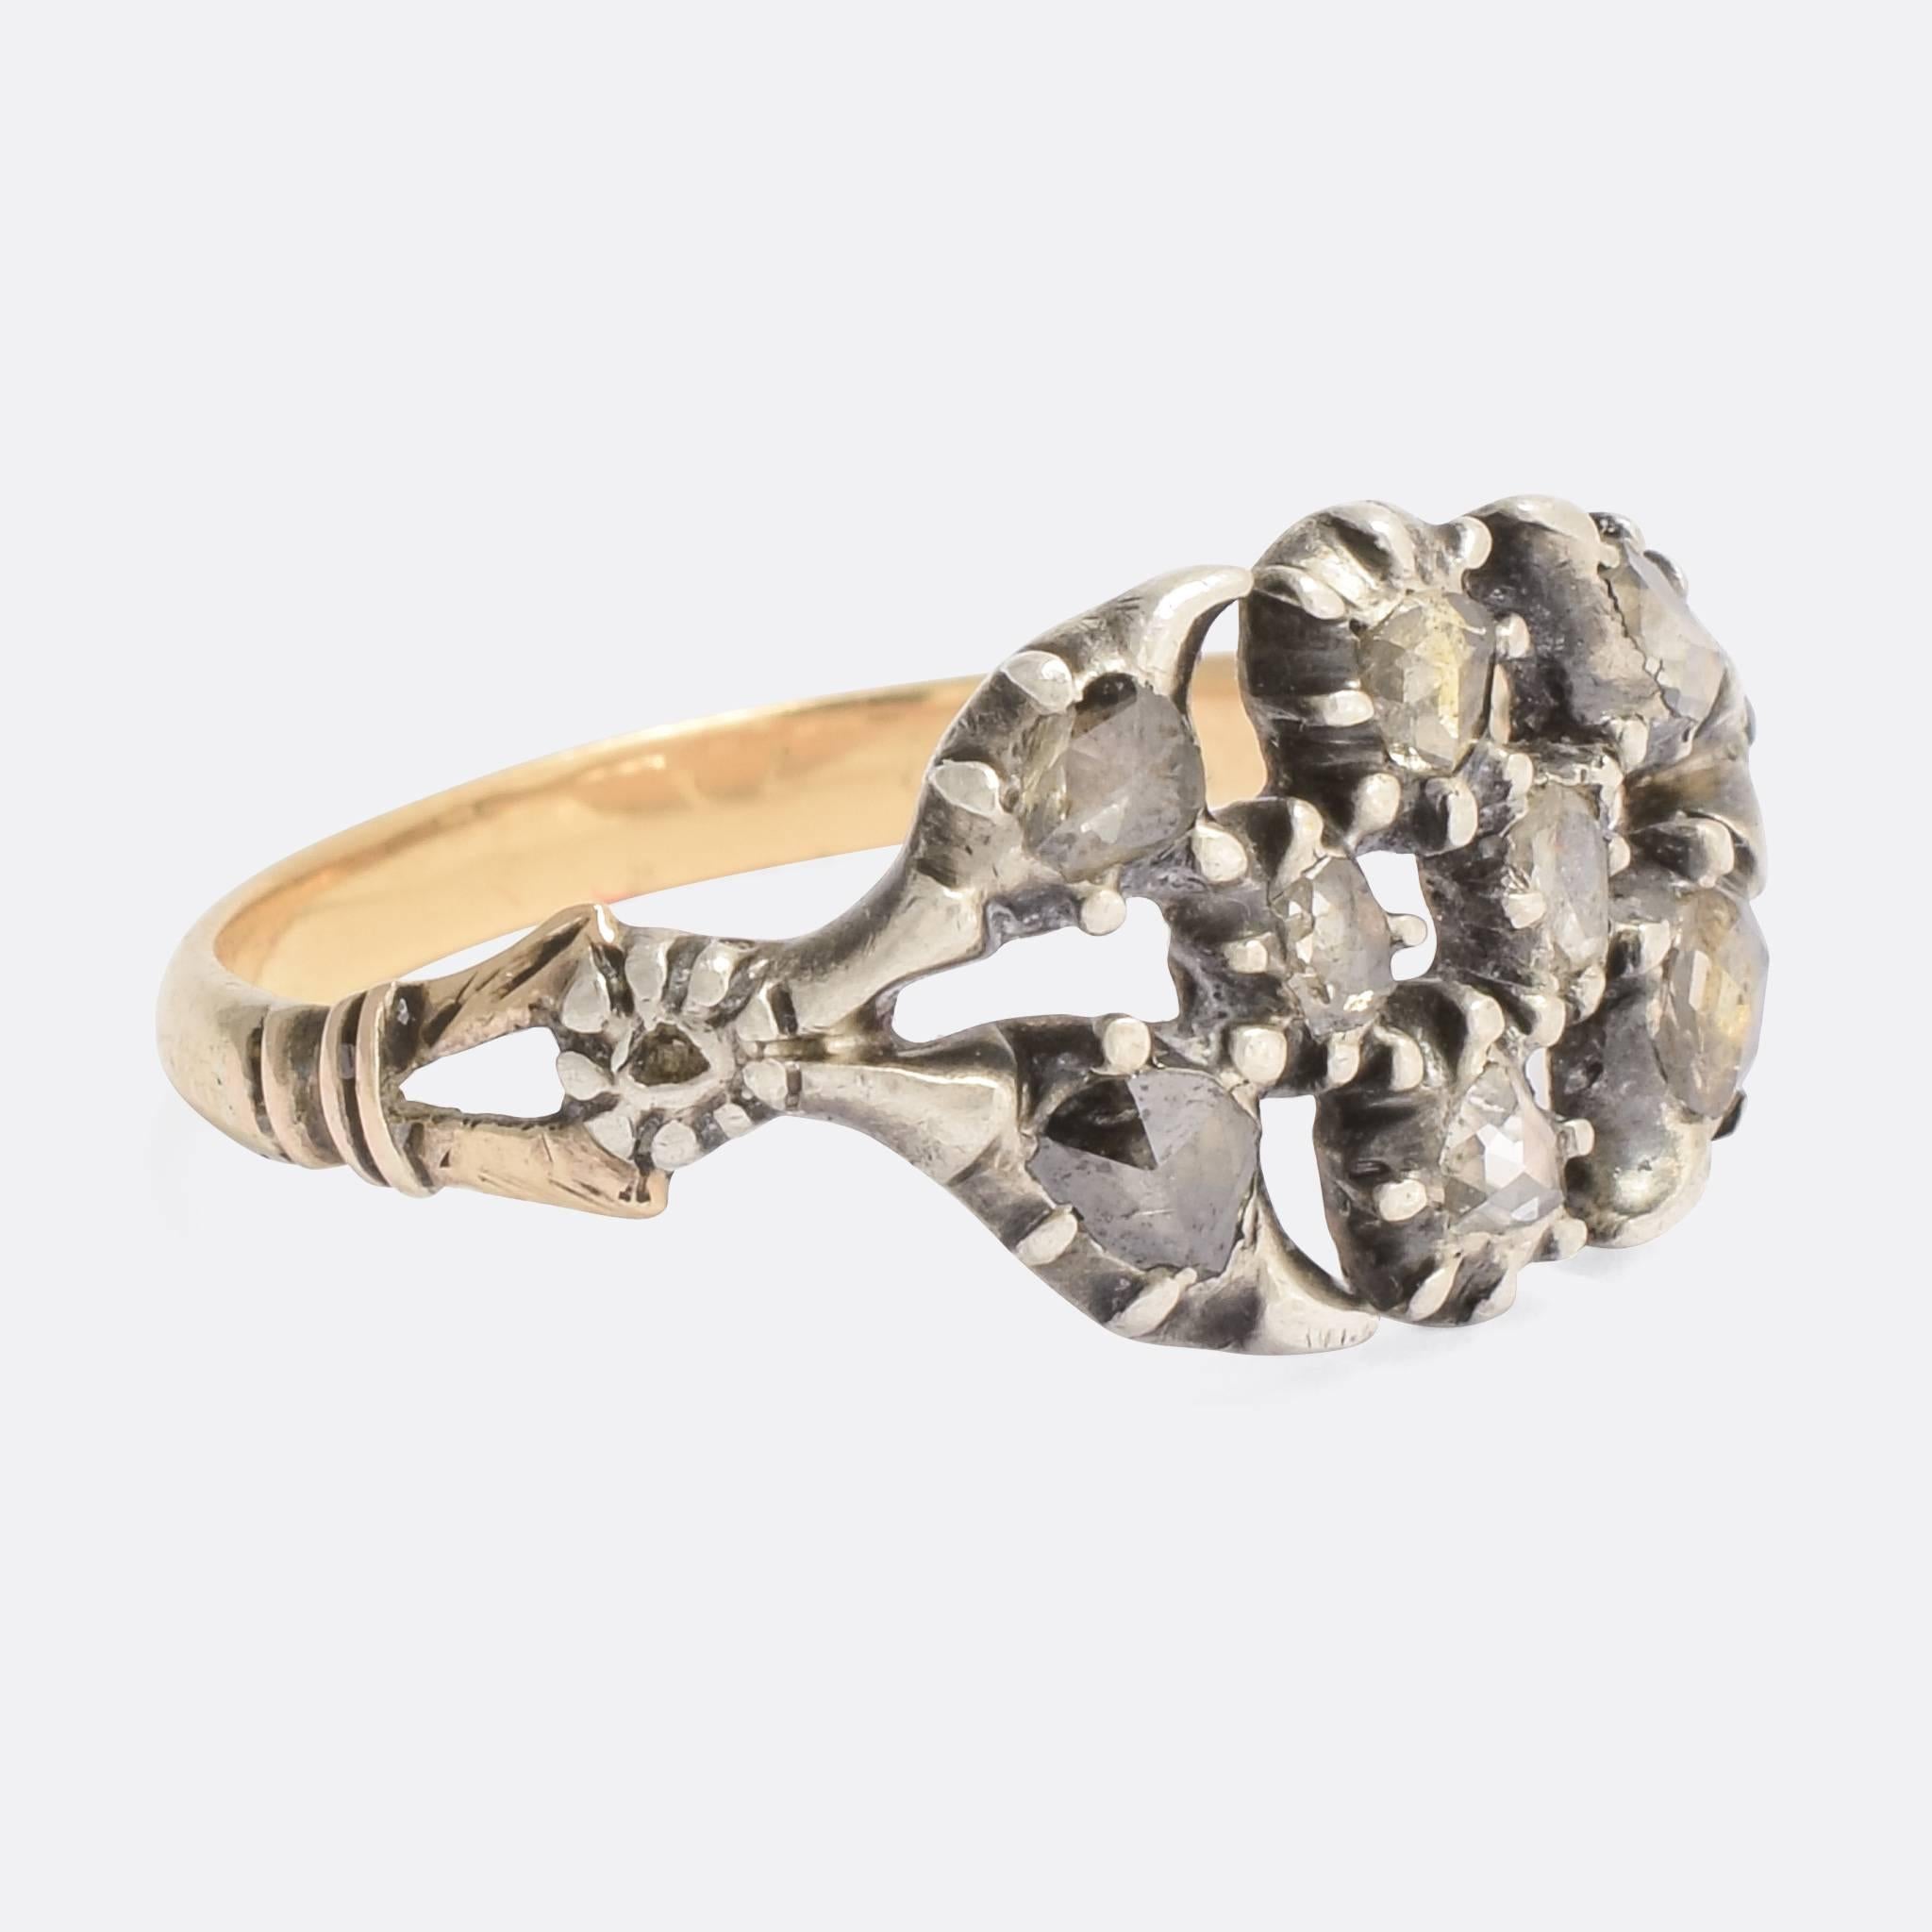 A beautiful antique cluster ring set with glistening rose cut diamonds. The piece dates to the early 19th Century, typically late Georgian in style, modelled in 15k gold and silver. The head is beautifully openworked with foliate motifs, while the